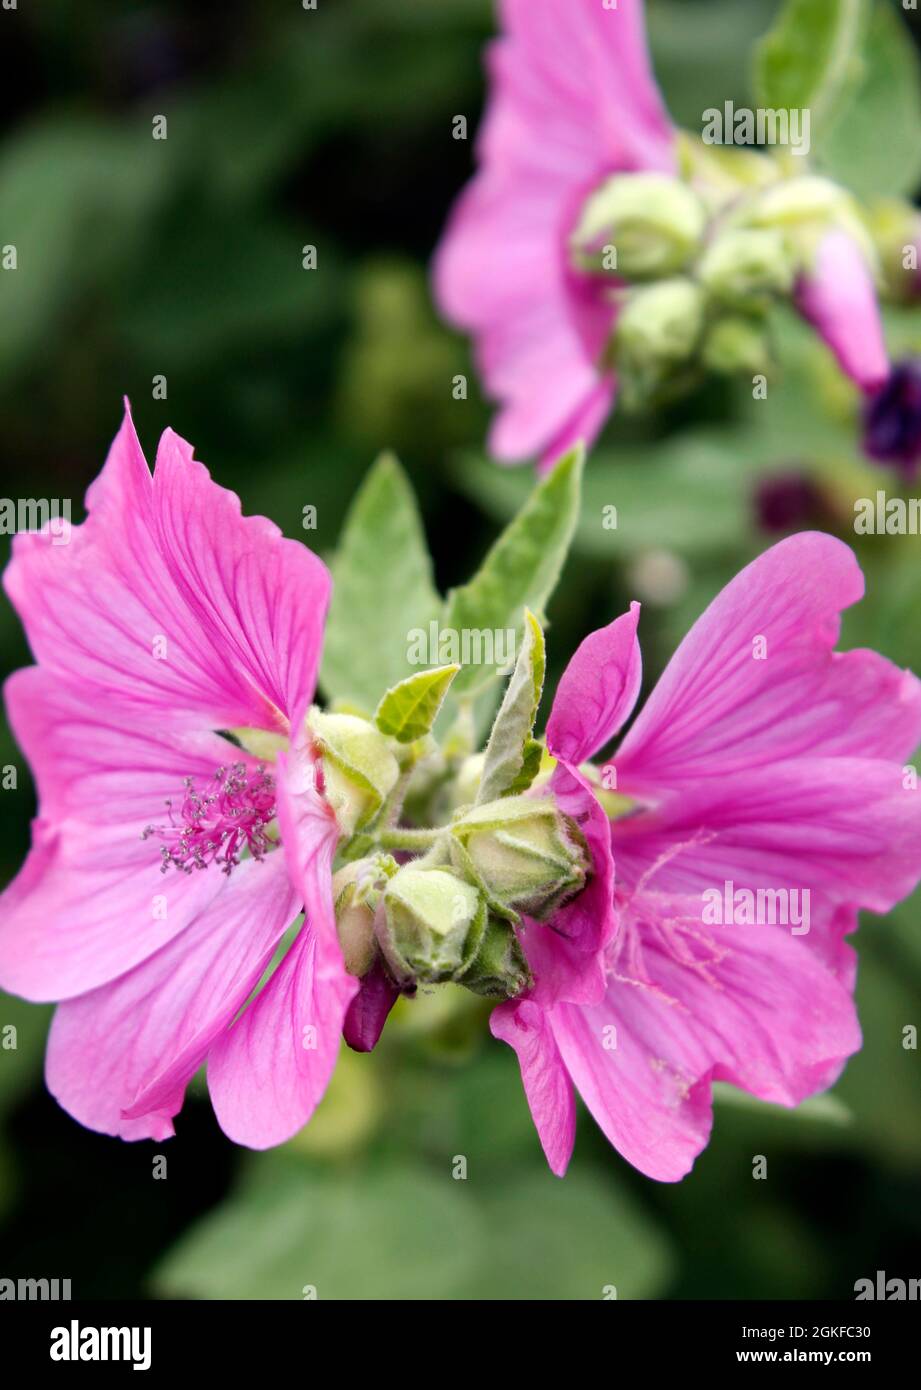 Bright pink flowers on the Lavatera x clementii Rosea (tree allow) bush Stock Photo